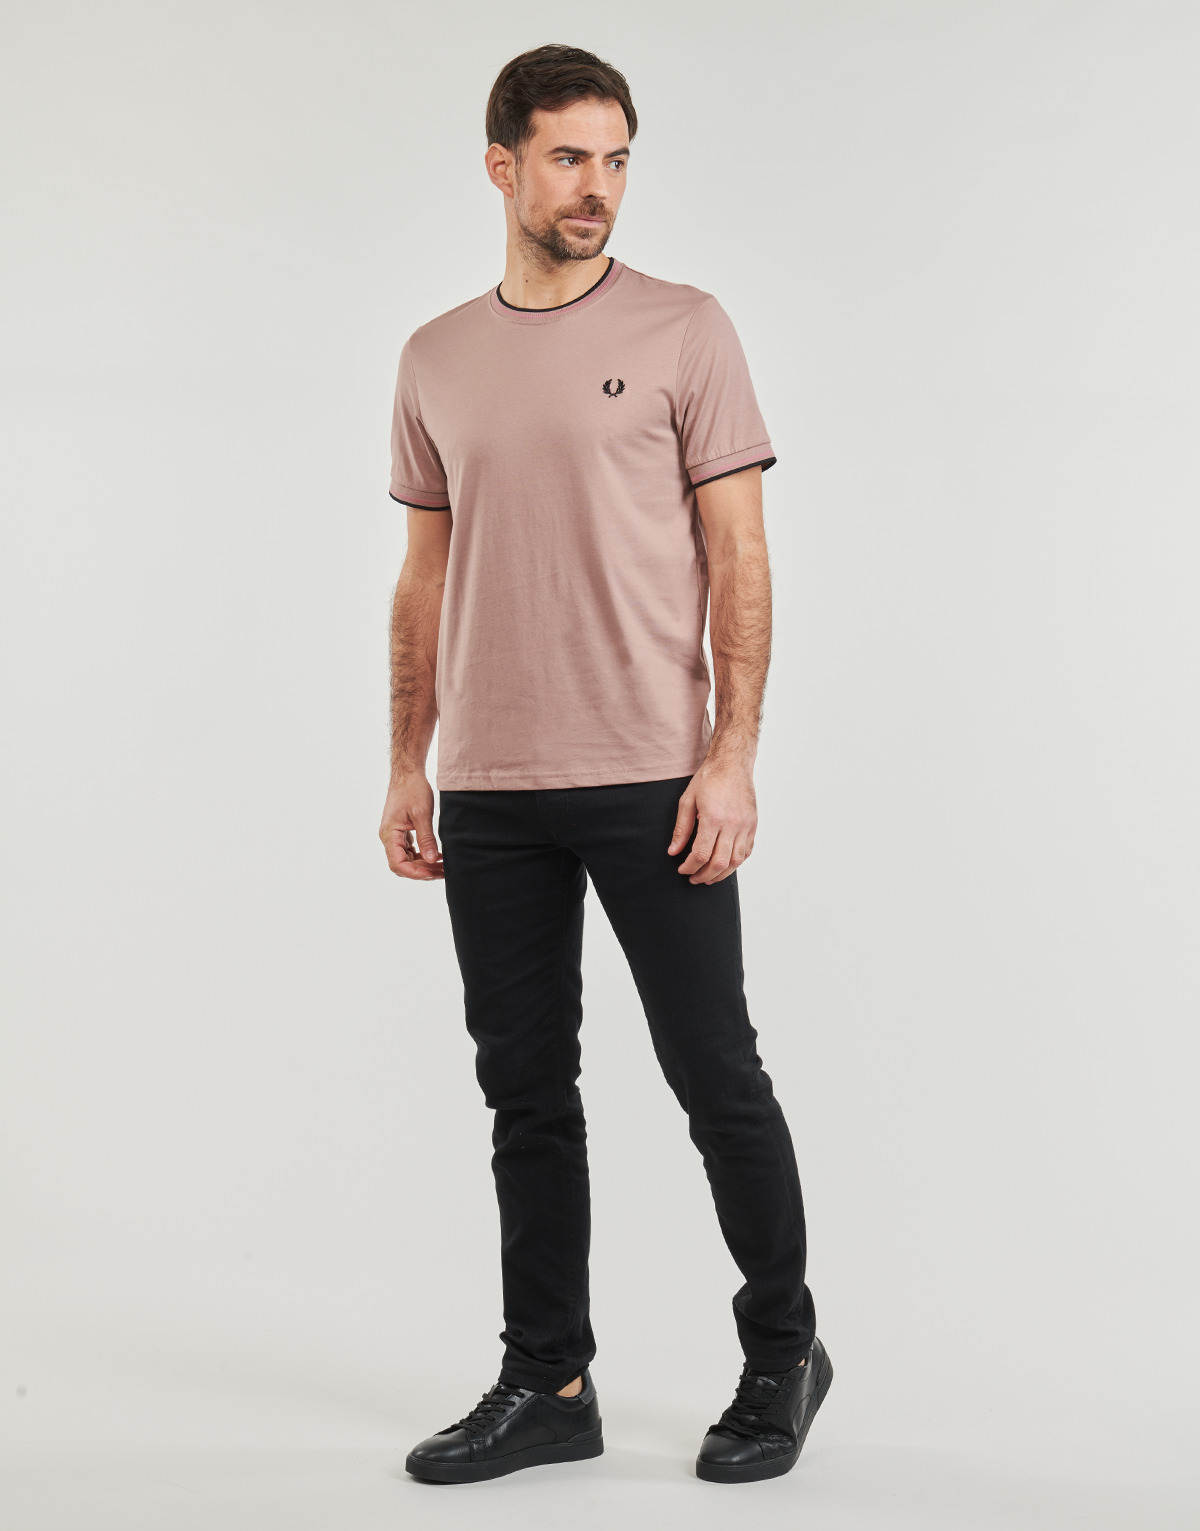 Fred Perry Rose / Noir TWIN TIPPED T-SHIRT uyN8zjzf